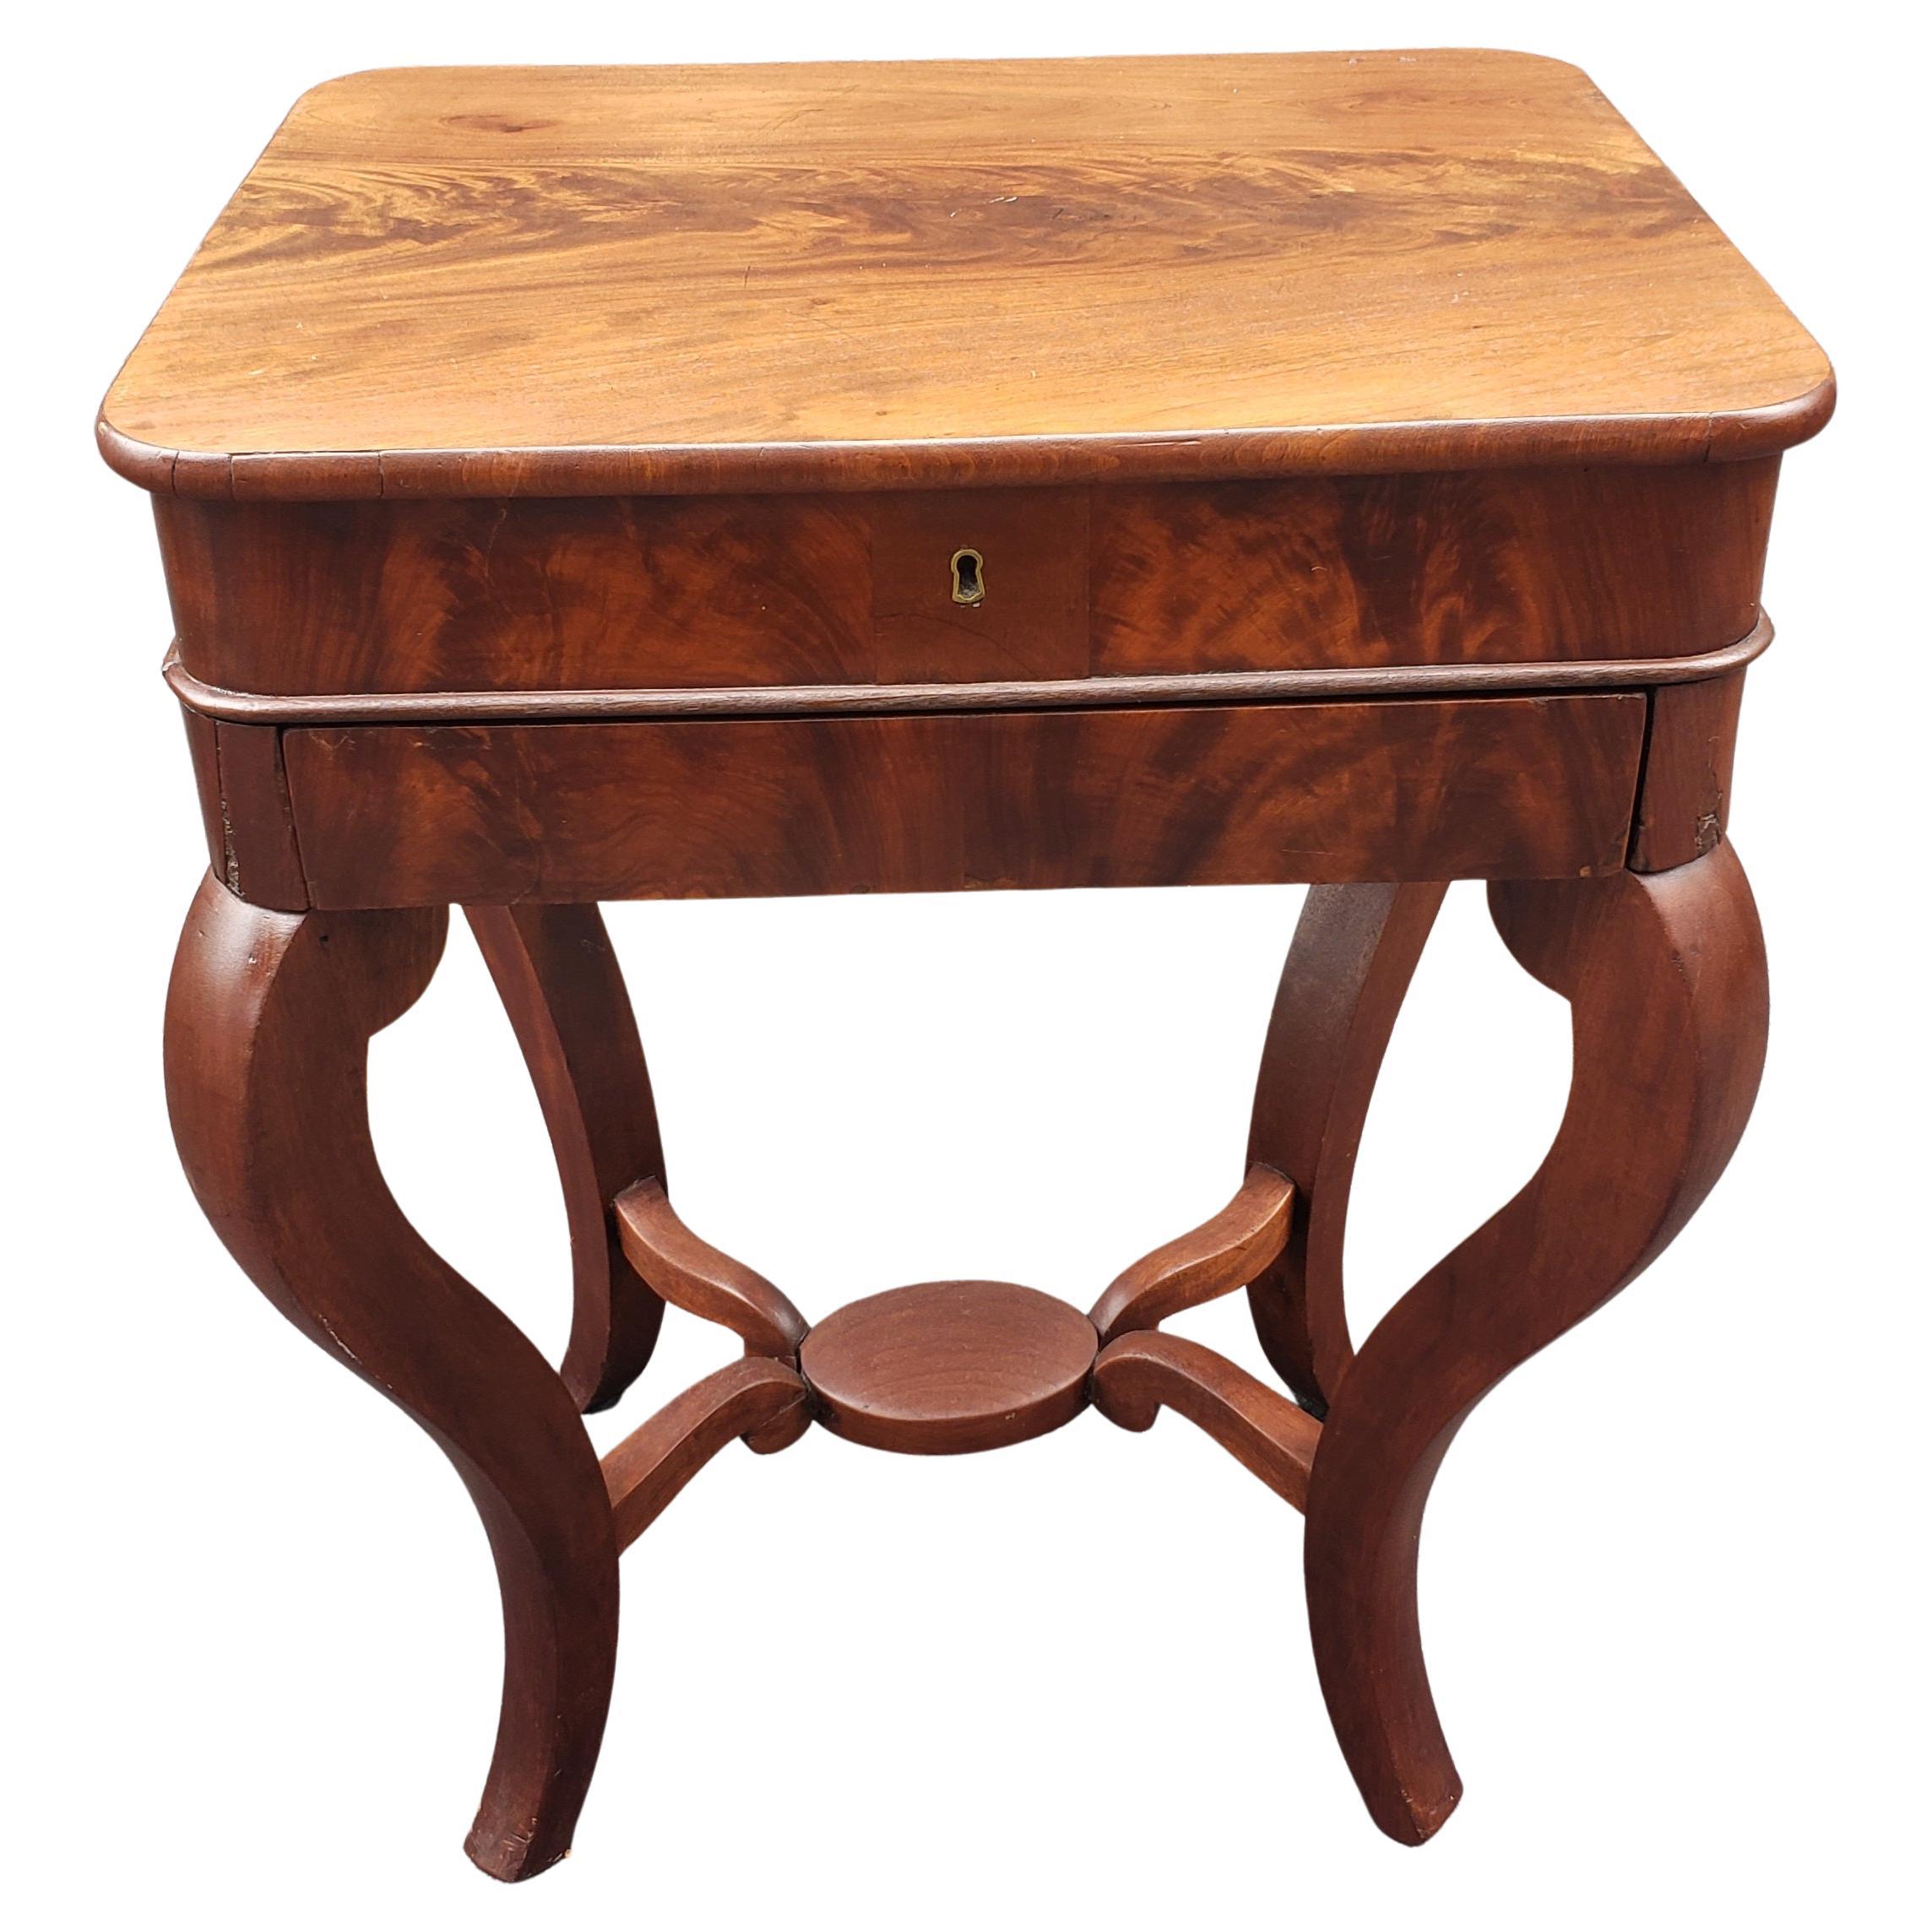 19th Century American Empire One-Drawer Flame Mahogany Sewing or Work Table For Sale